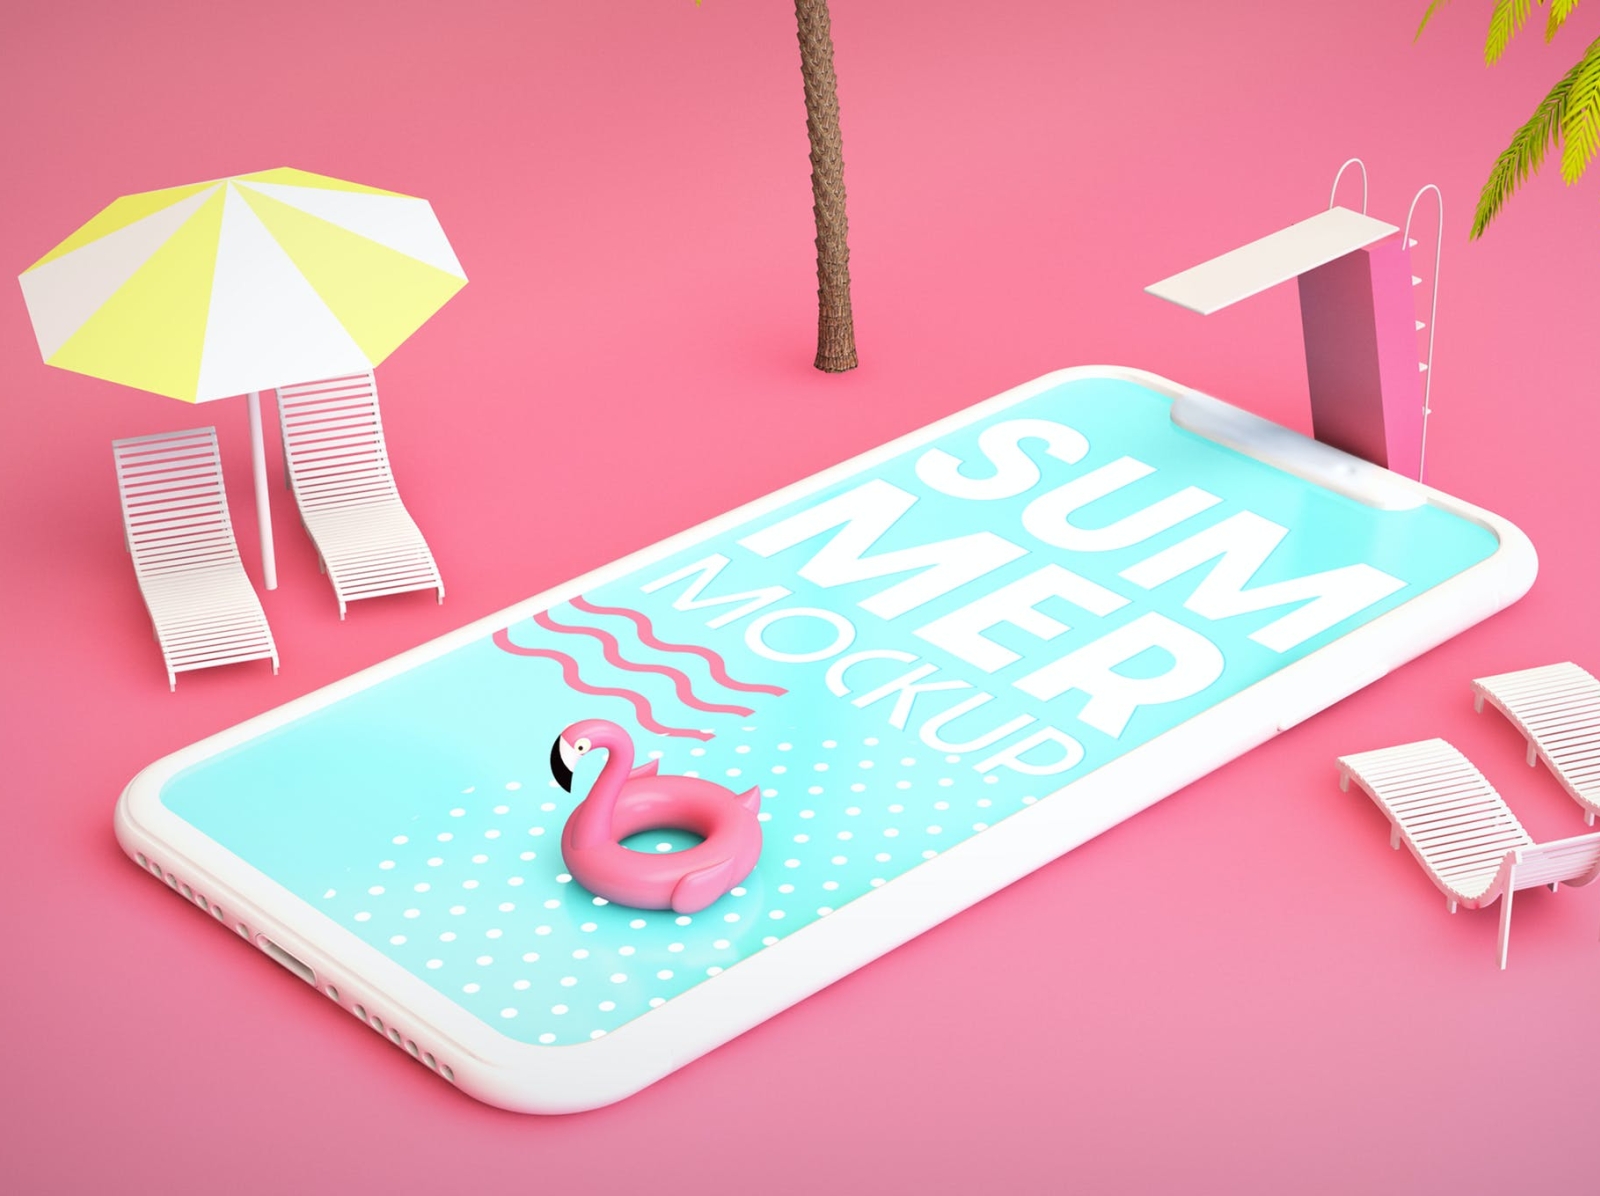 Swimming Pool Summer Concept Mobile Mockup